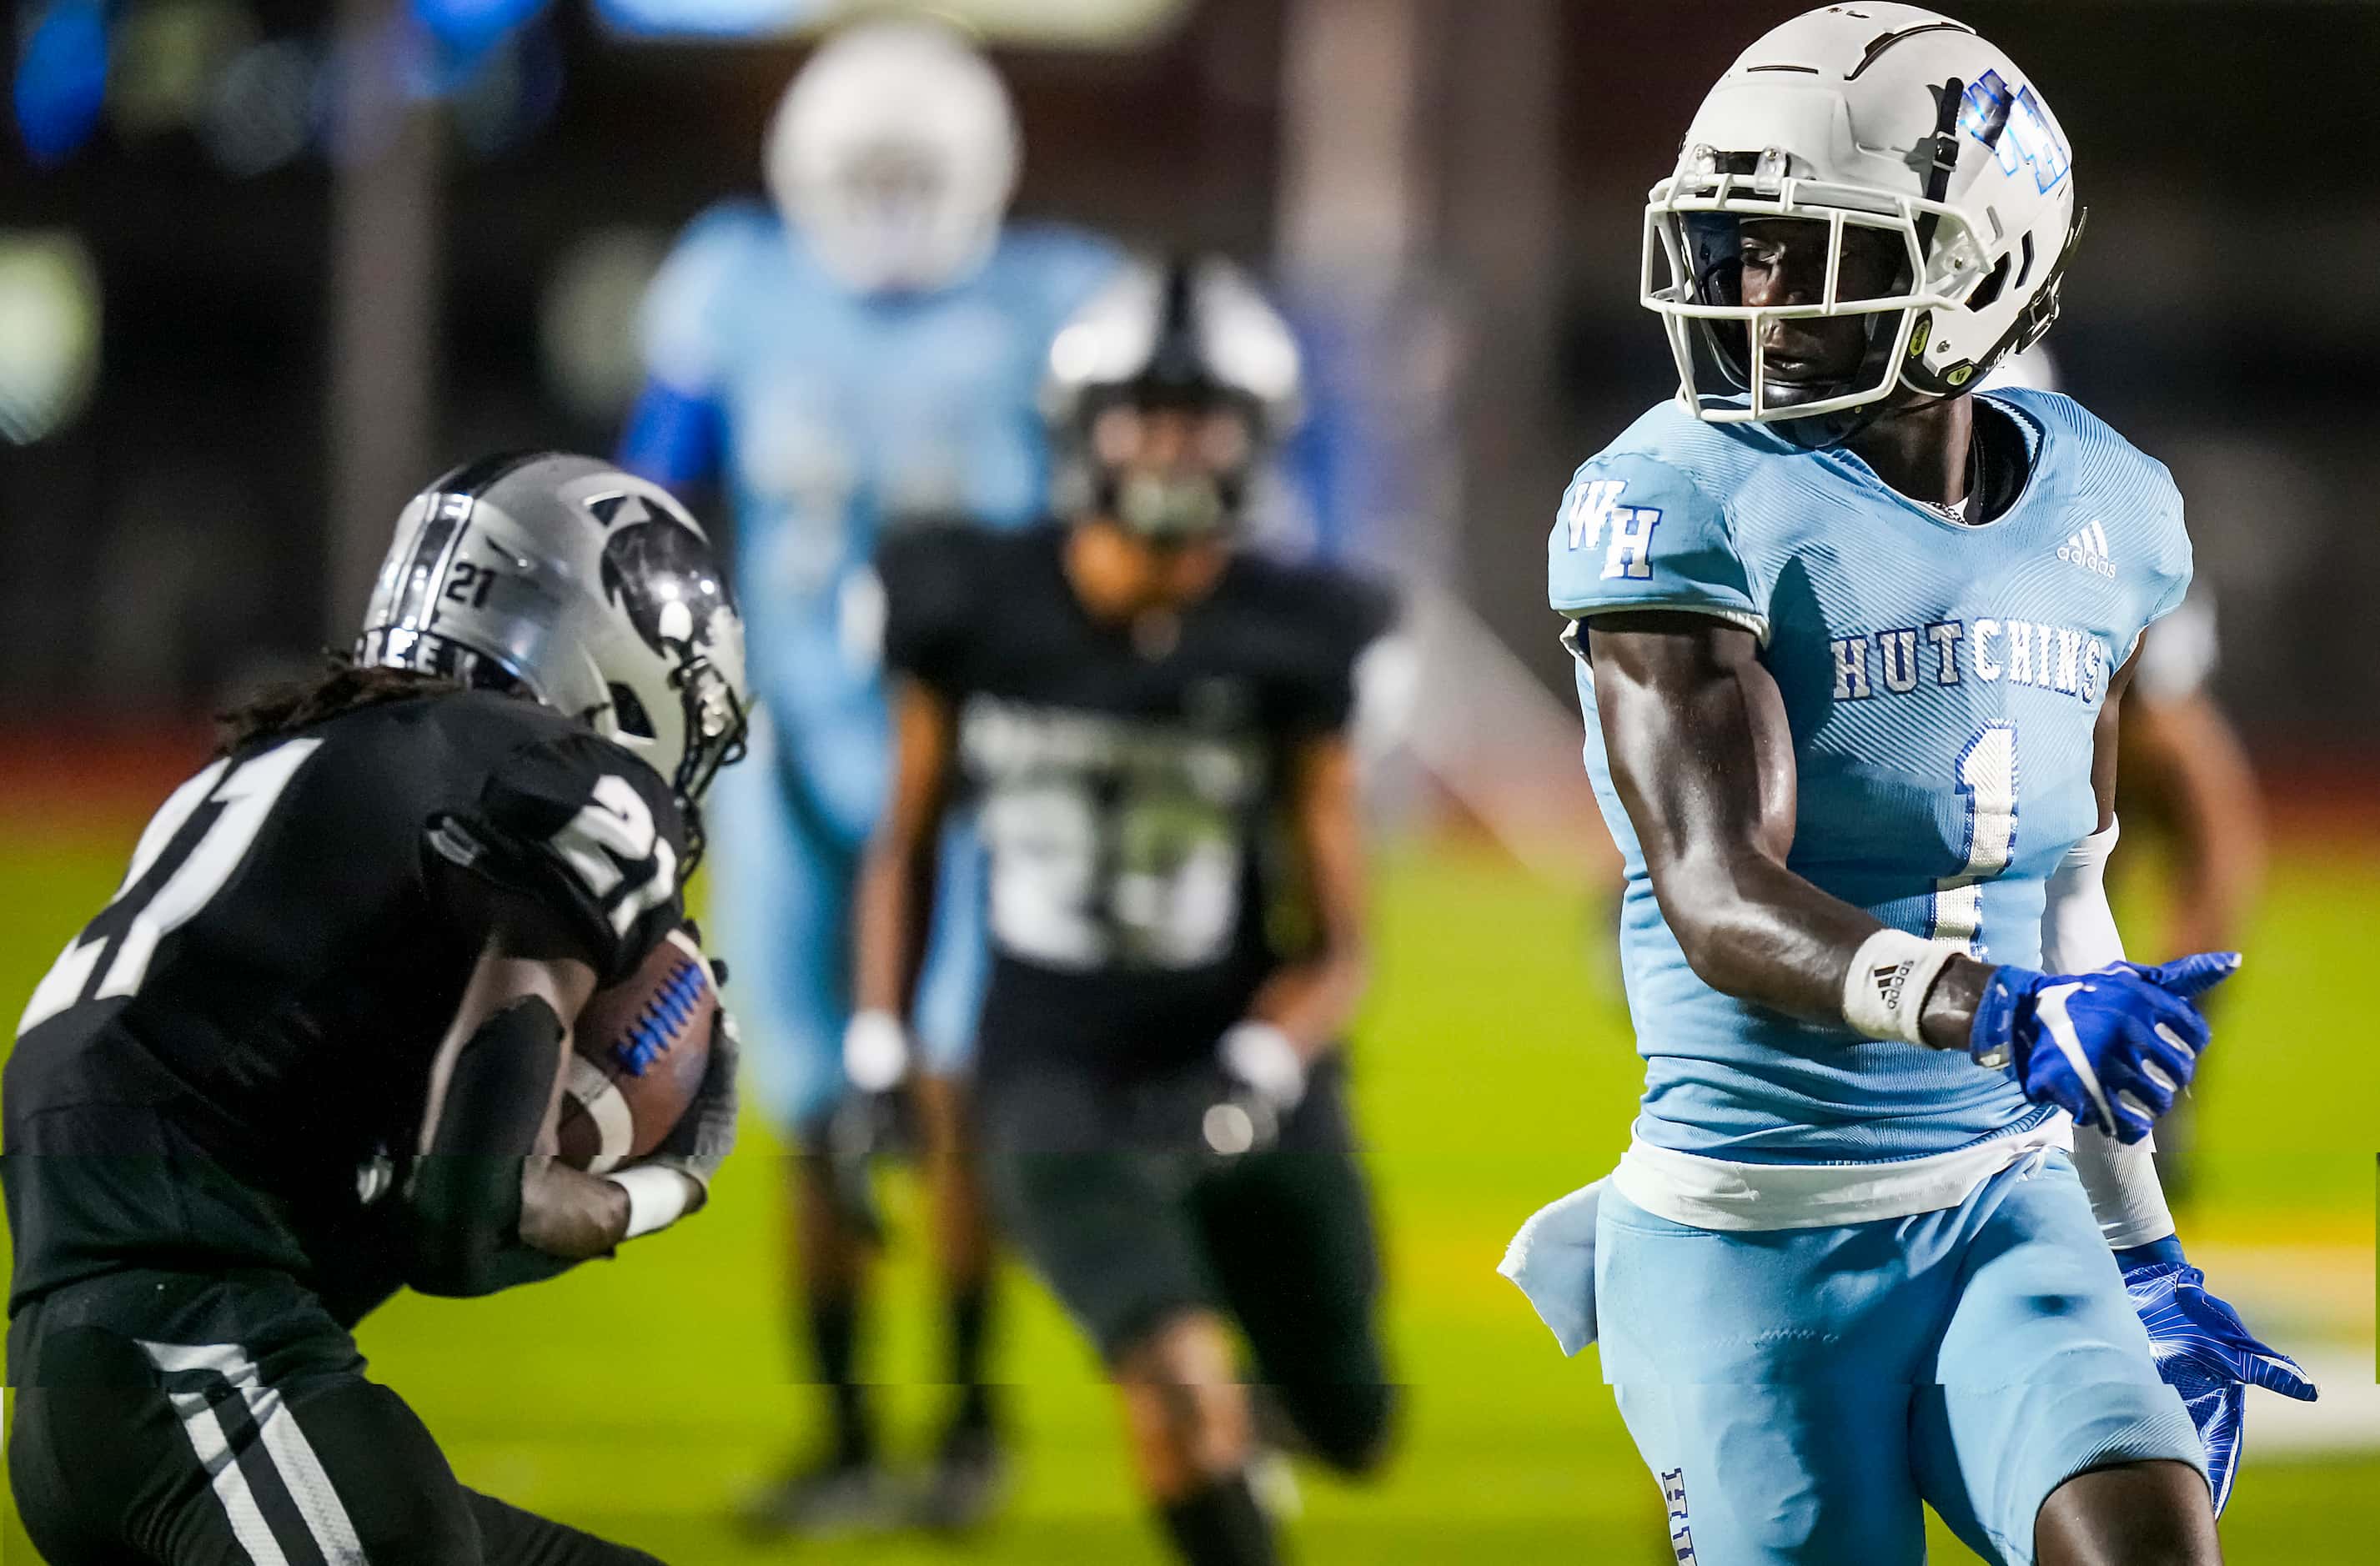 Panther Creek defensive back Donovan Webb (21) intercepts a pass intended for...